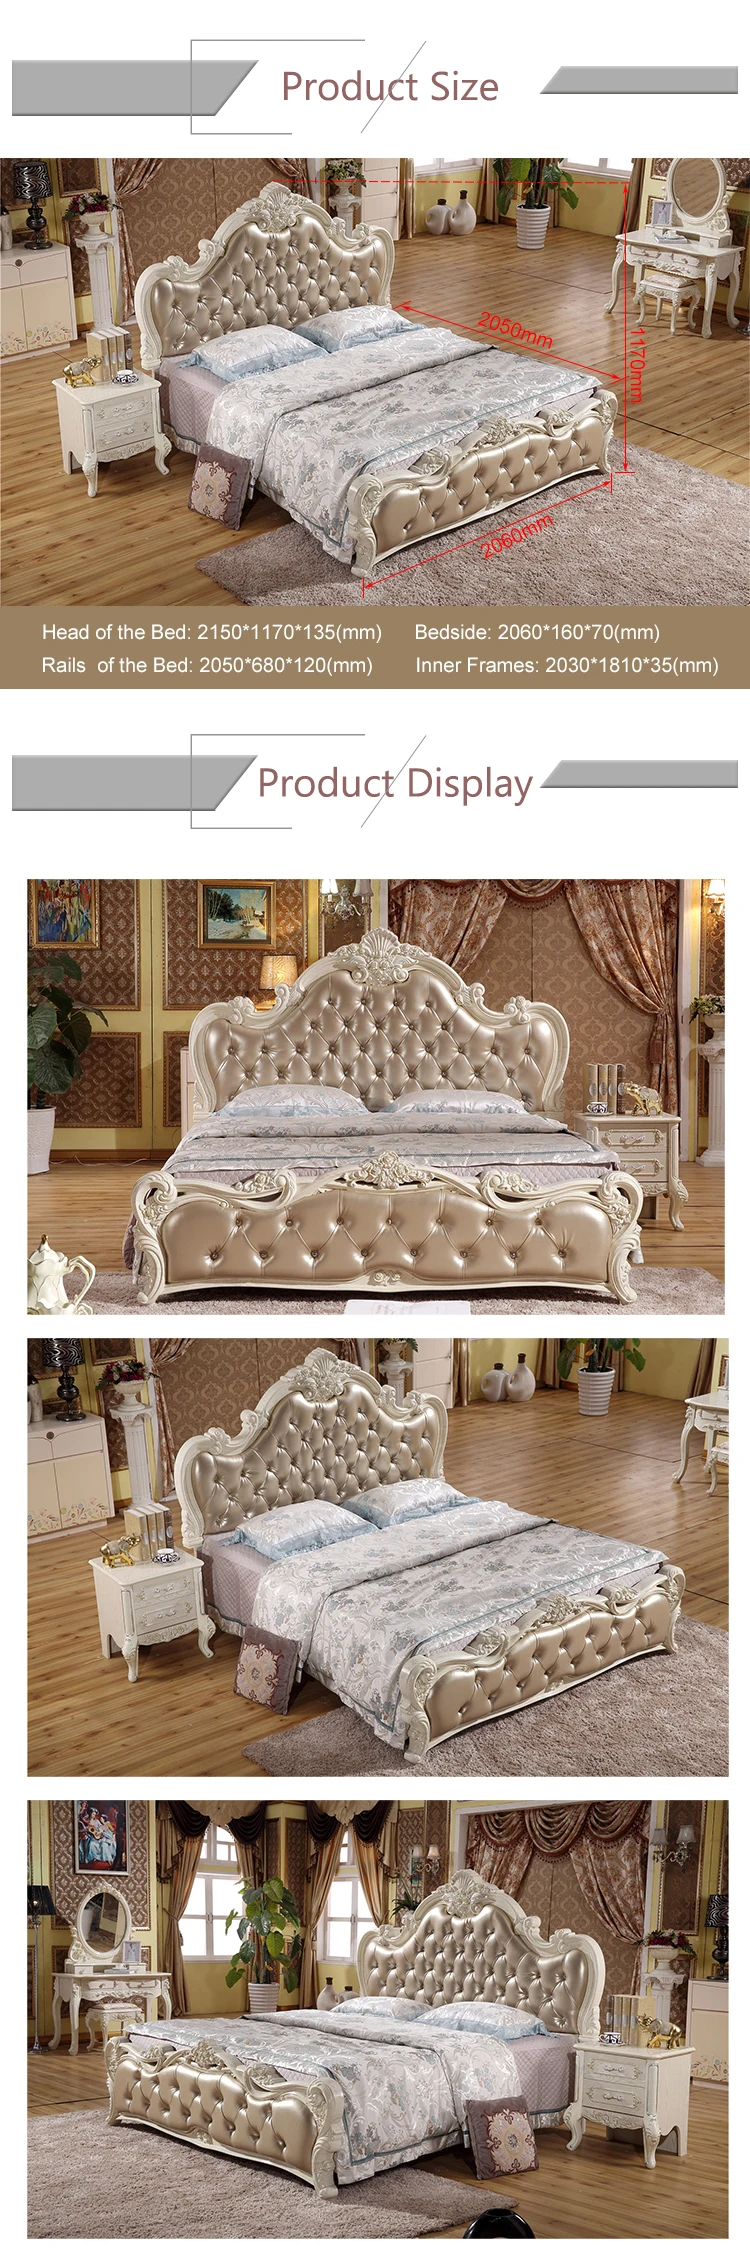 King Size Sets Mattress Bed Room Set Royal Wooden Prices Bedroom Furniture Luxury